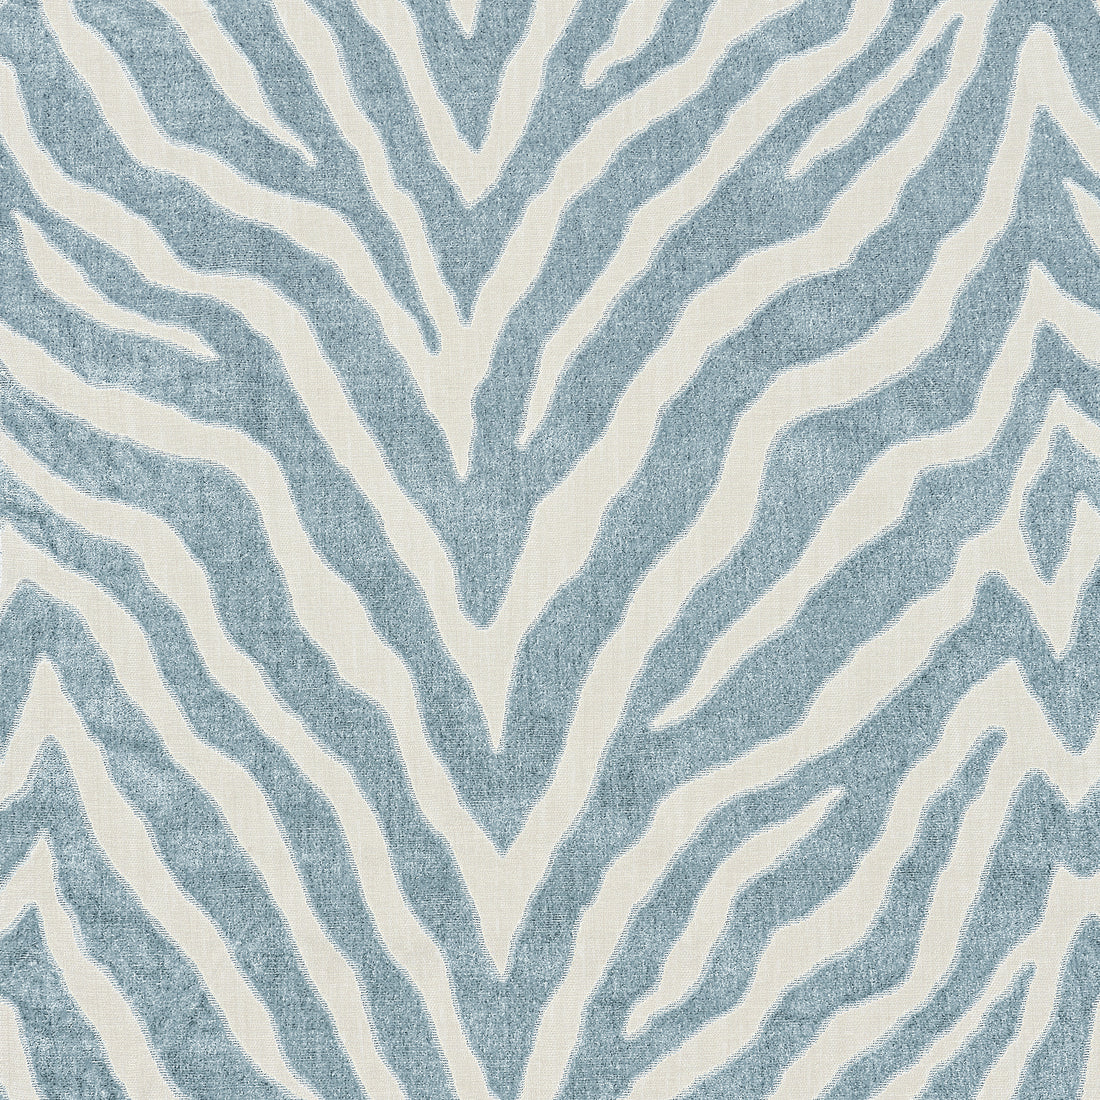 Etosha Velvet fabric in mineral color - pattern number W80407 - by Thibaut in the Woven Resource Vol 10 Menagerie collection